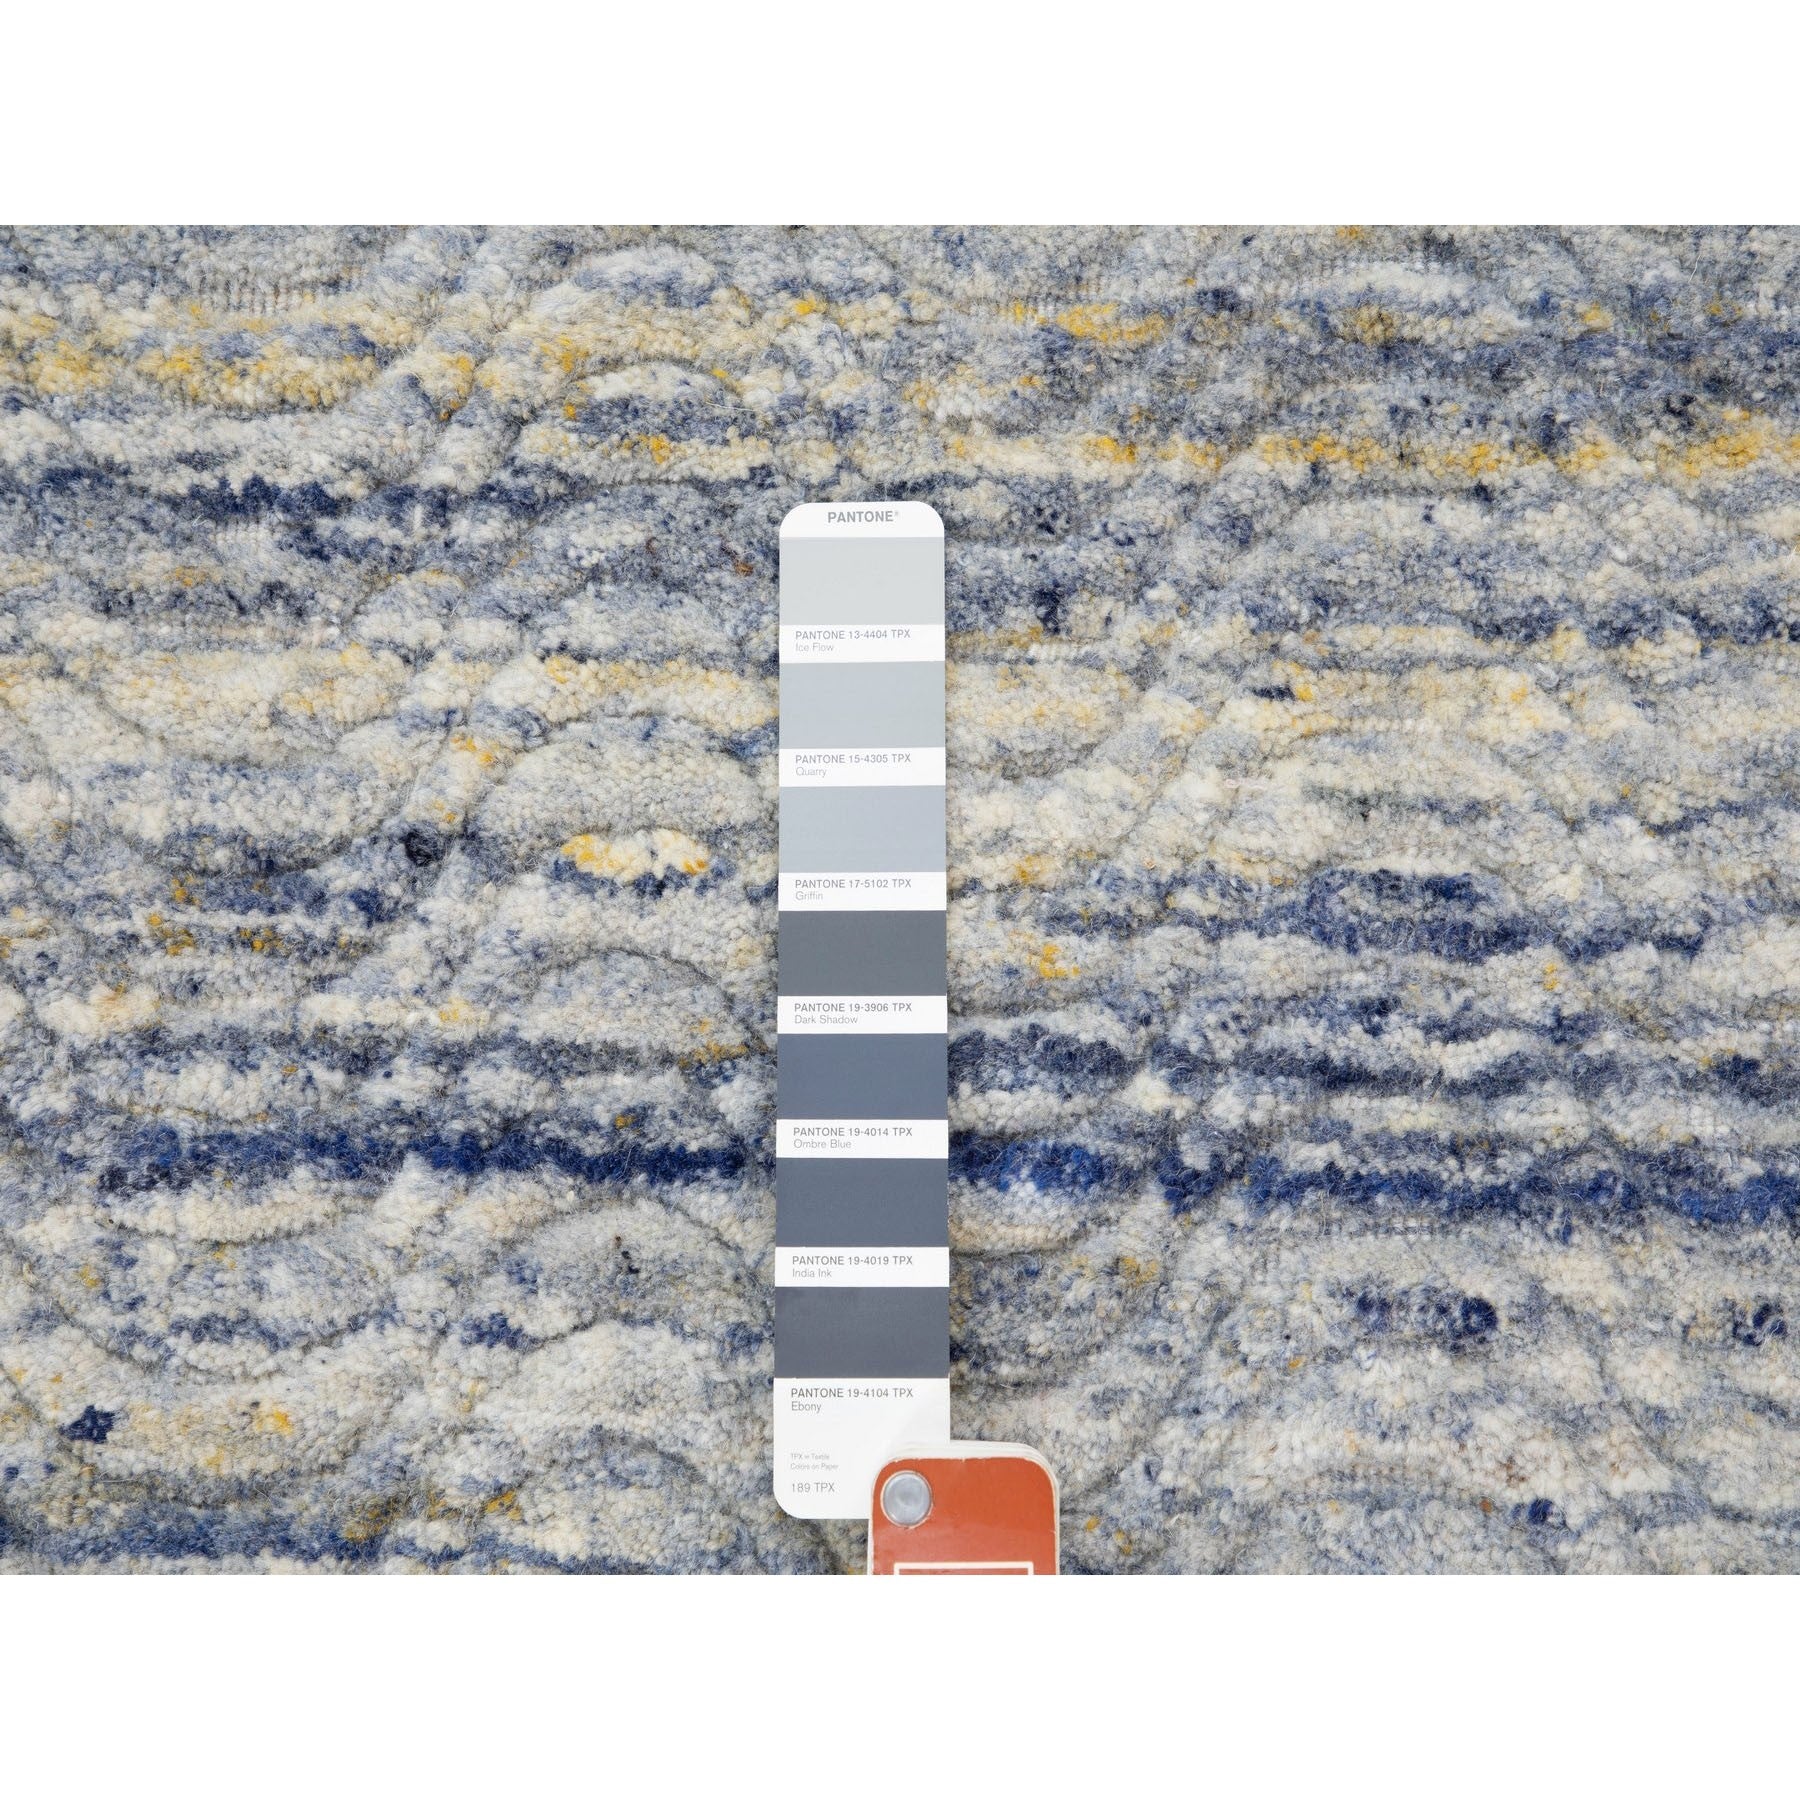 Hand Loomed Modern and Contemporary Runner > Design# CCSR58402 > Size: 2'-6" x 9'-9"